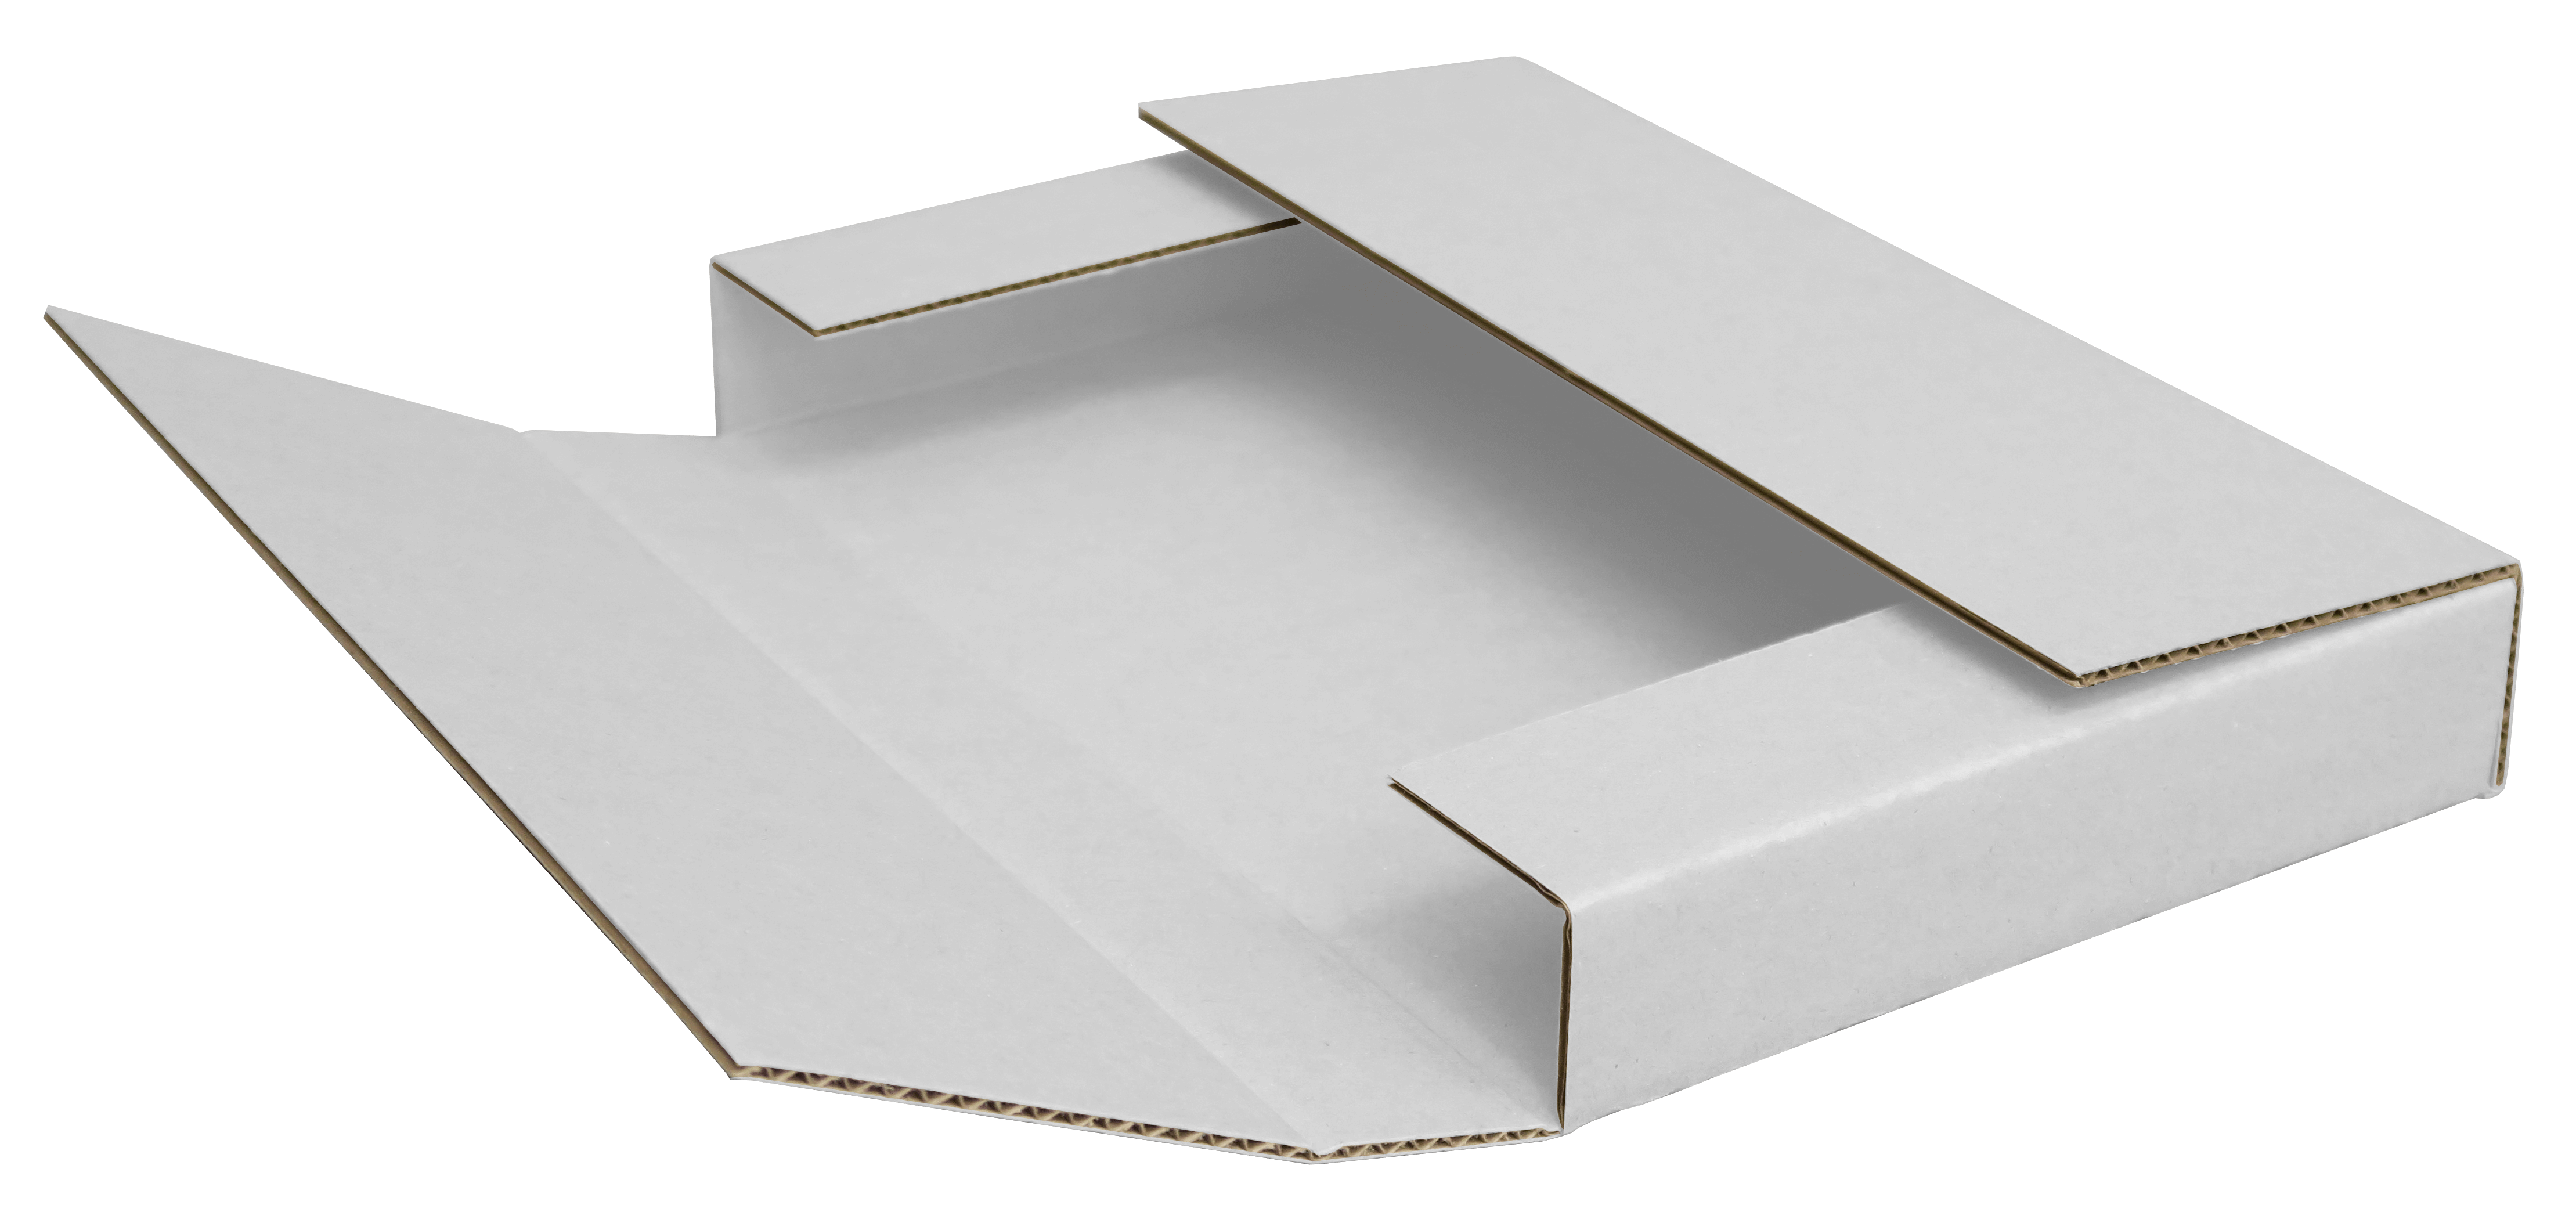 White Shipping Boxes From Custom Boxes Now